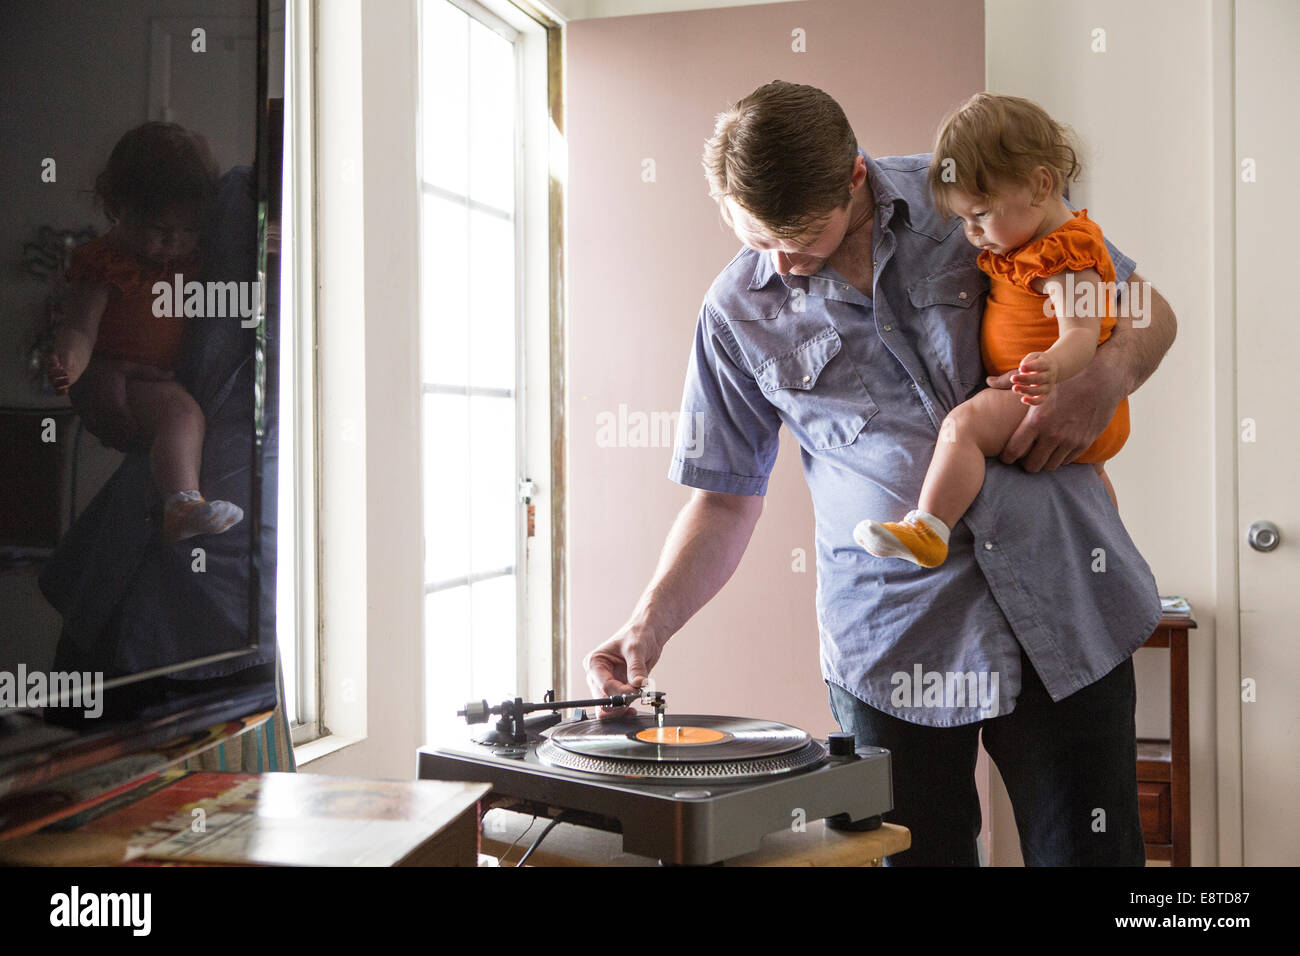 Young Girl playing records avec fille Banque D'Images